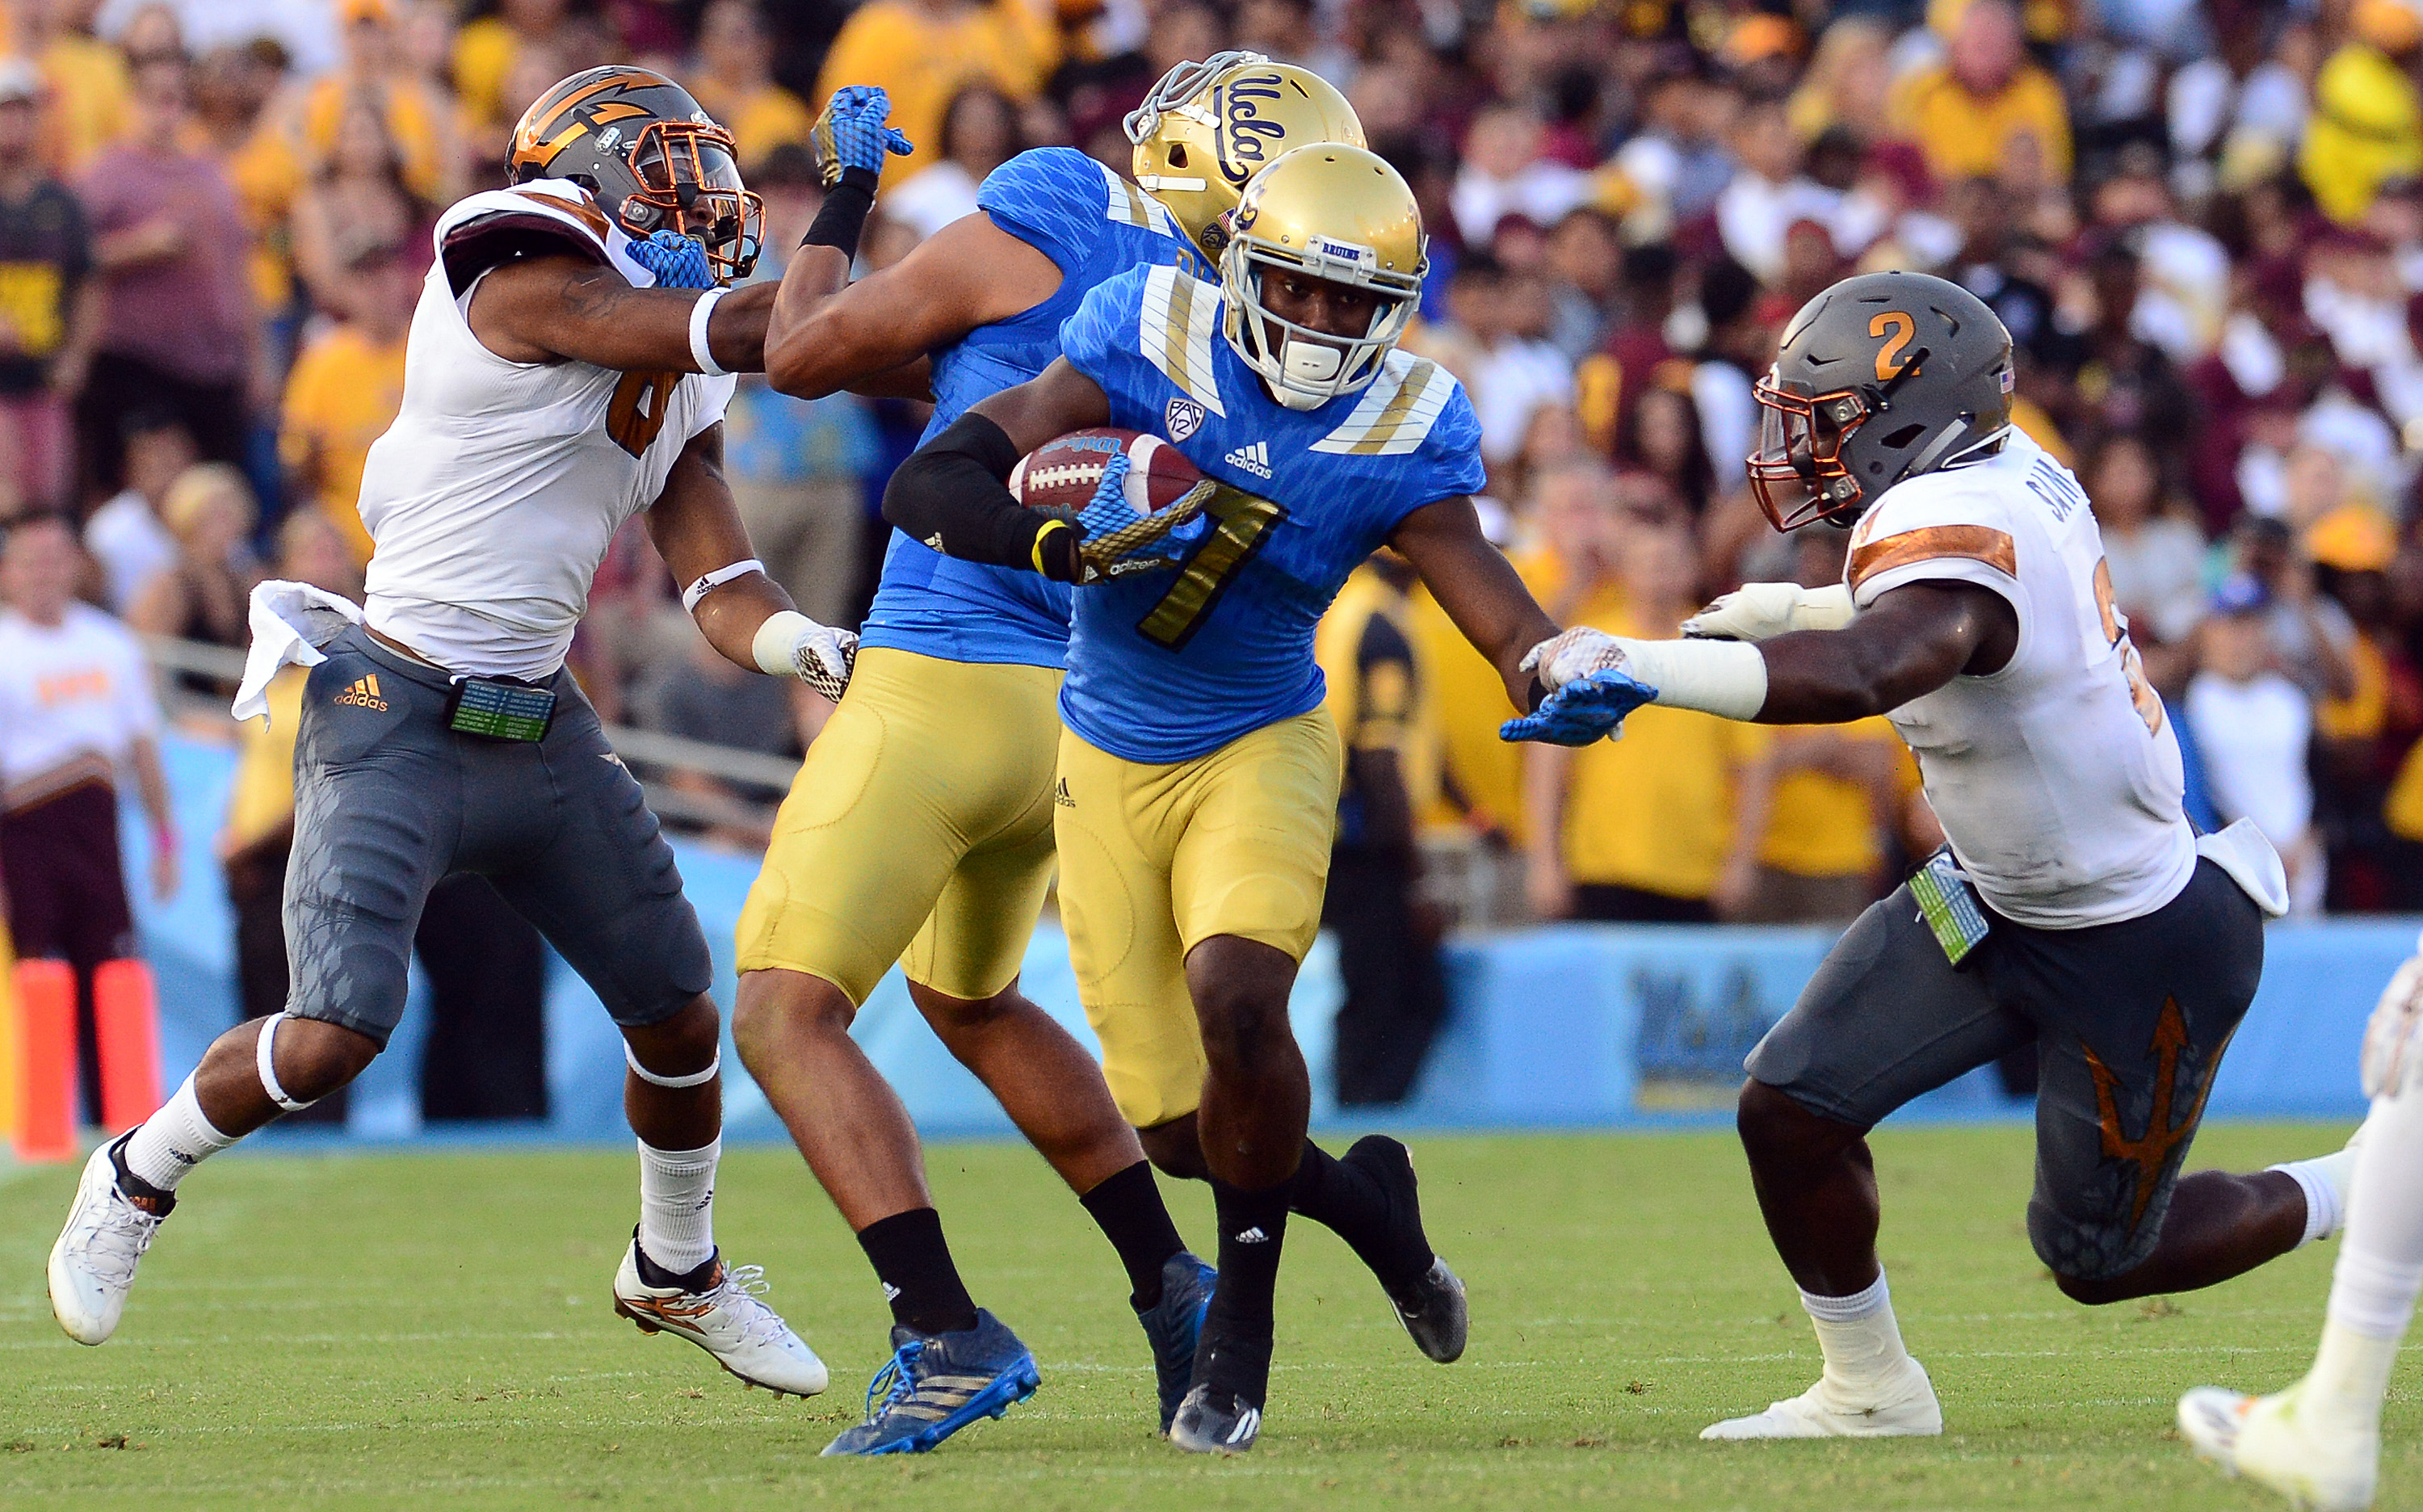 UCLA wide receiver Devin Fuller (7) catches a pass for yardage against Arizona State in the first half of a NCAA college football game at the Rose Bowl in Pasadena, Calif., Saturday, Oct. 3, 2015. (Photo by Keith Birmingham/ Pasadena Star-News)